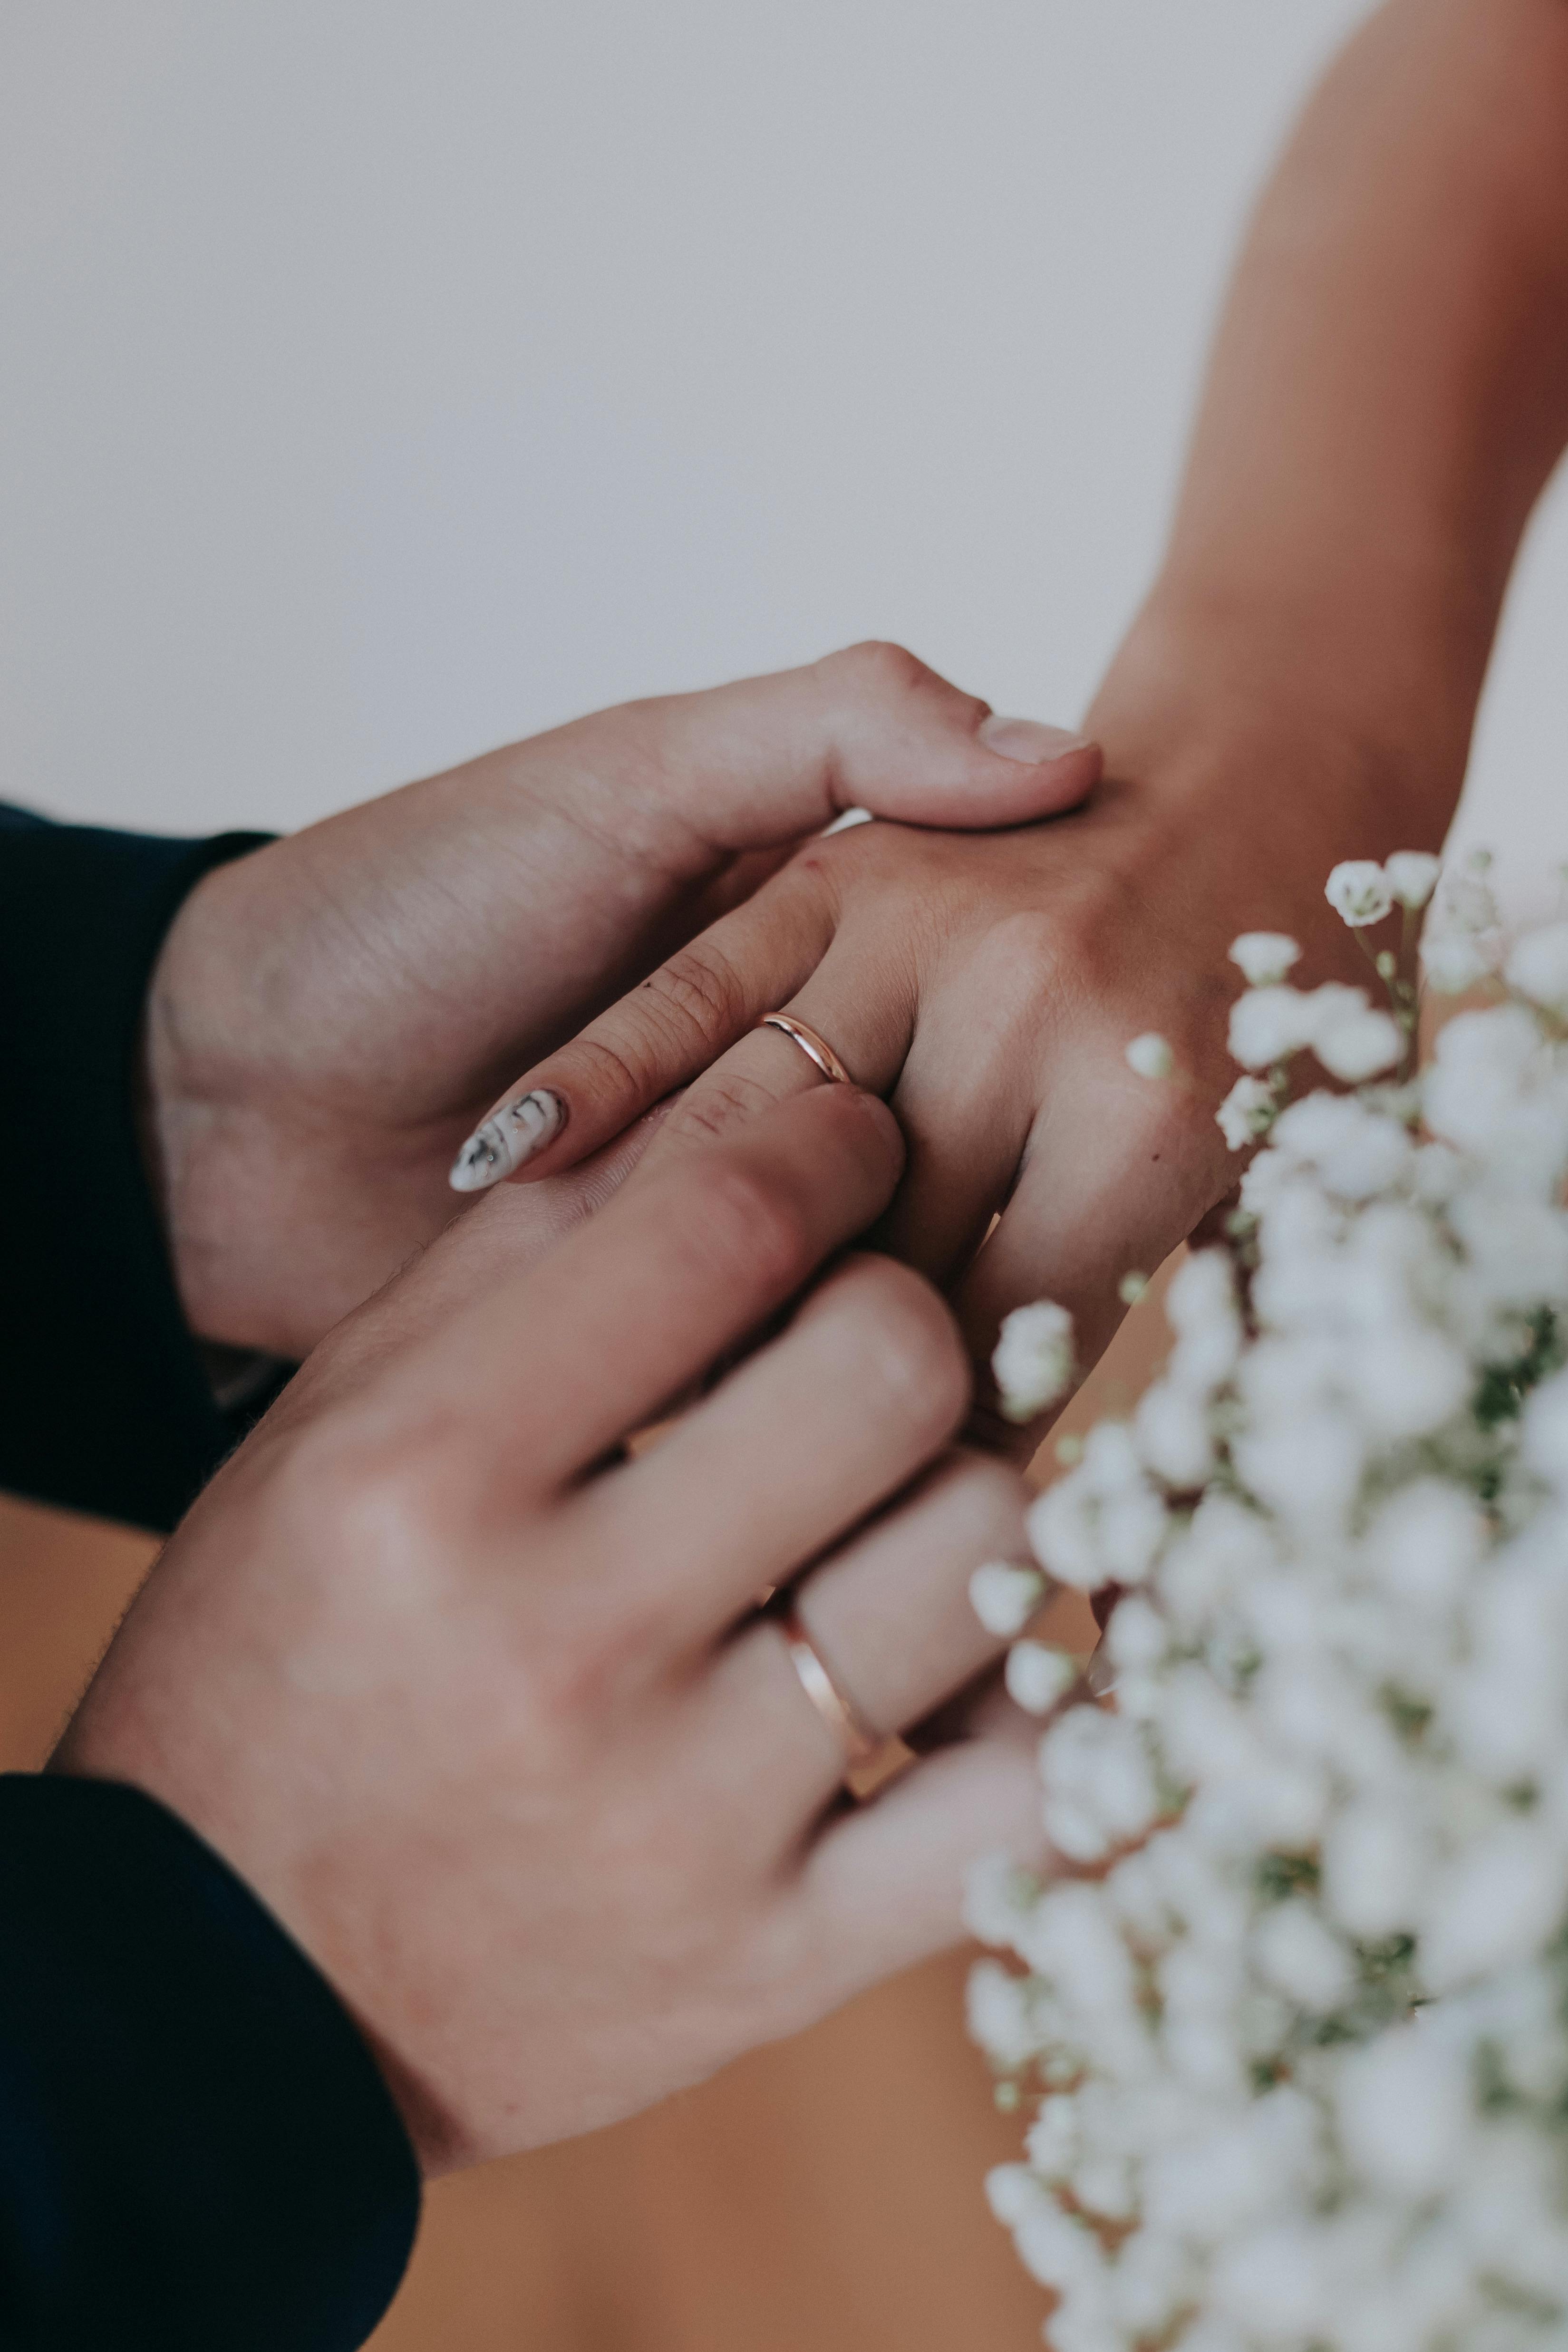 Download Husband And Wife Wedding Rings Pictures | Wallpapers.com